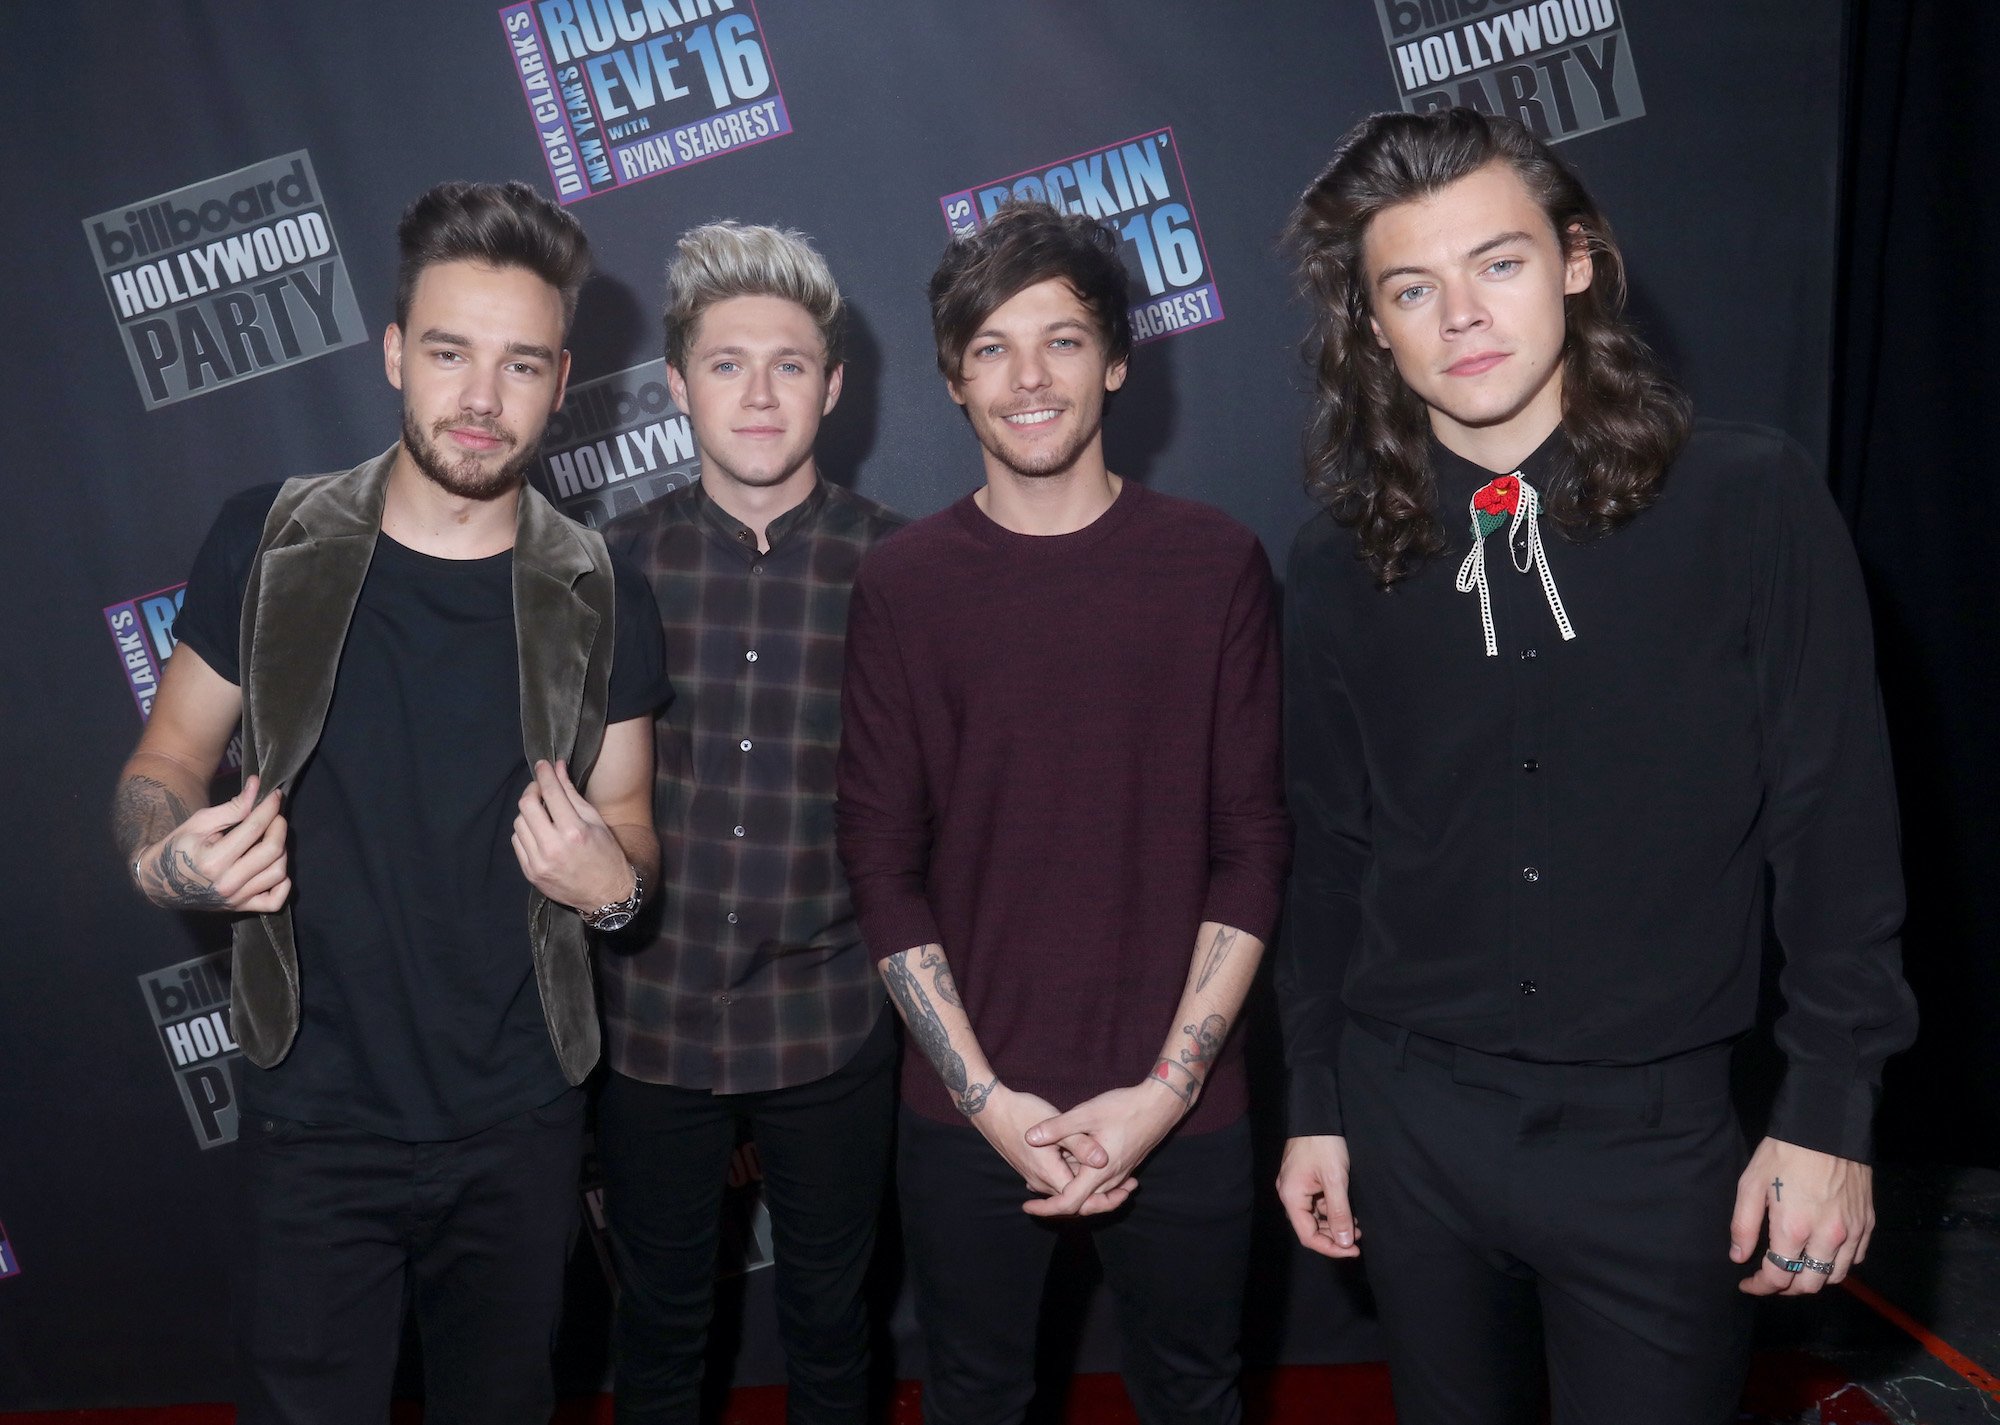 One Direction is linked to the Grammys in 1 way that doesn't include Harry Styles